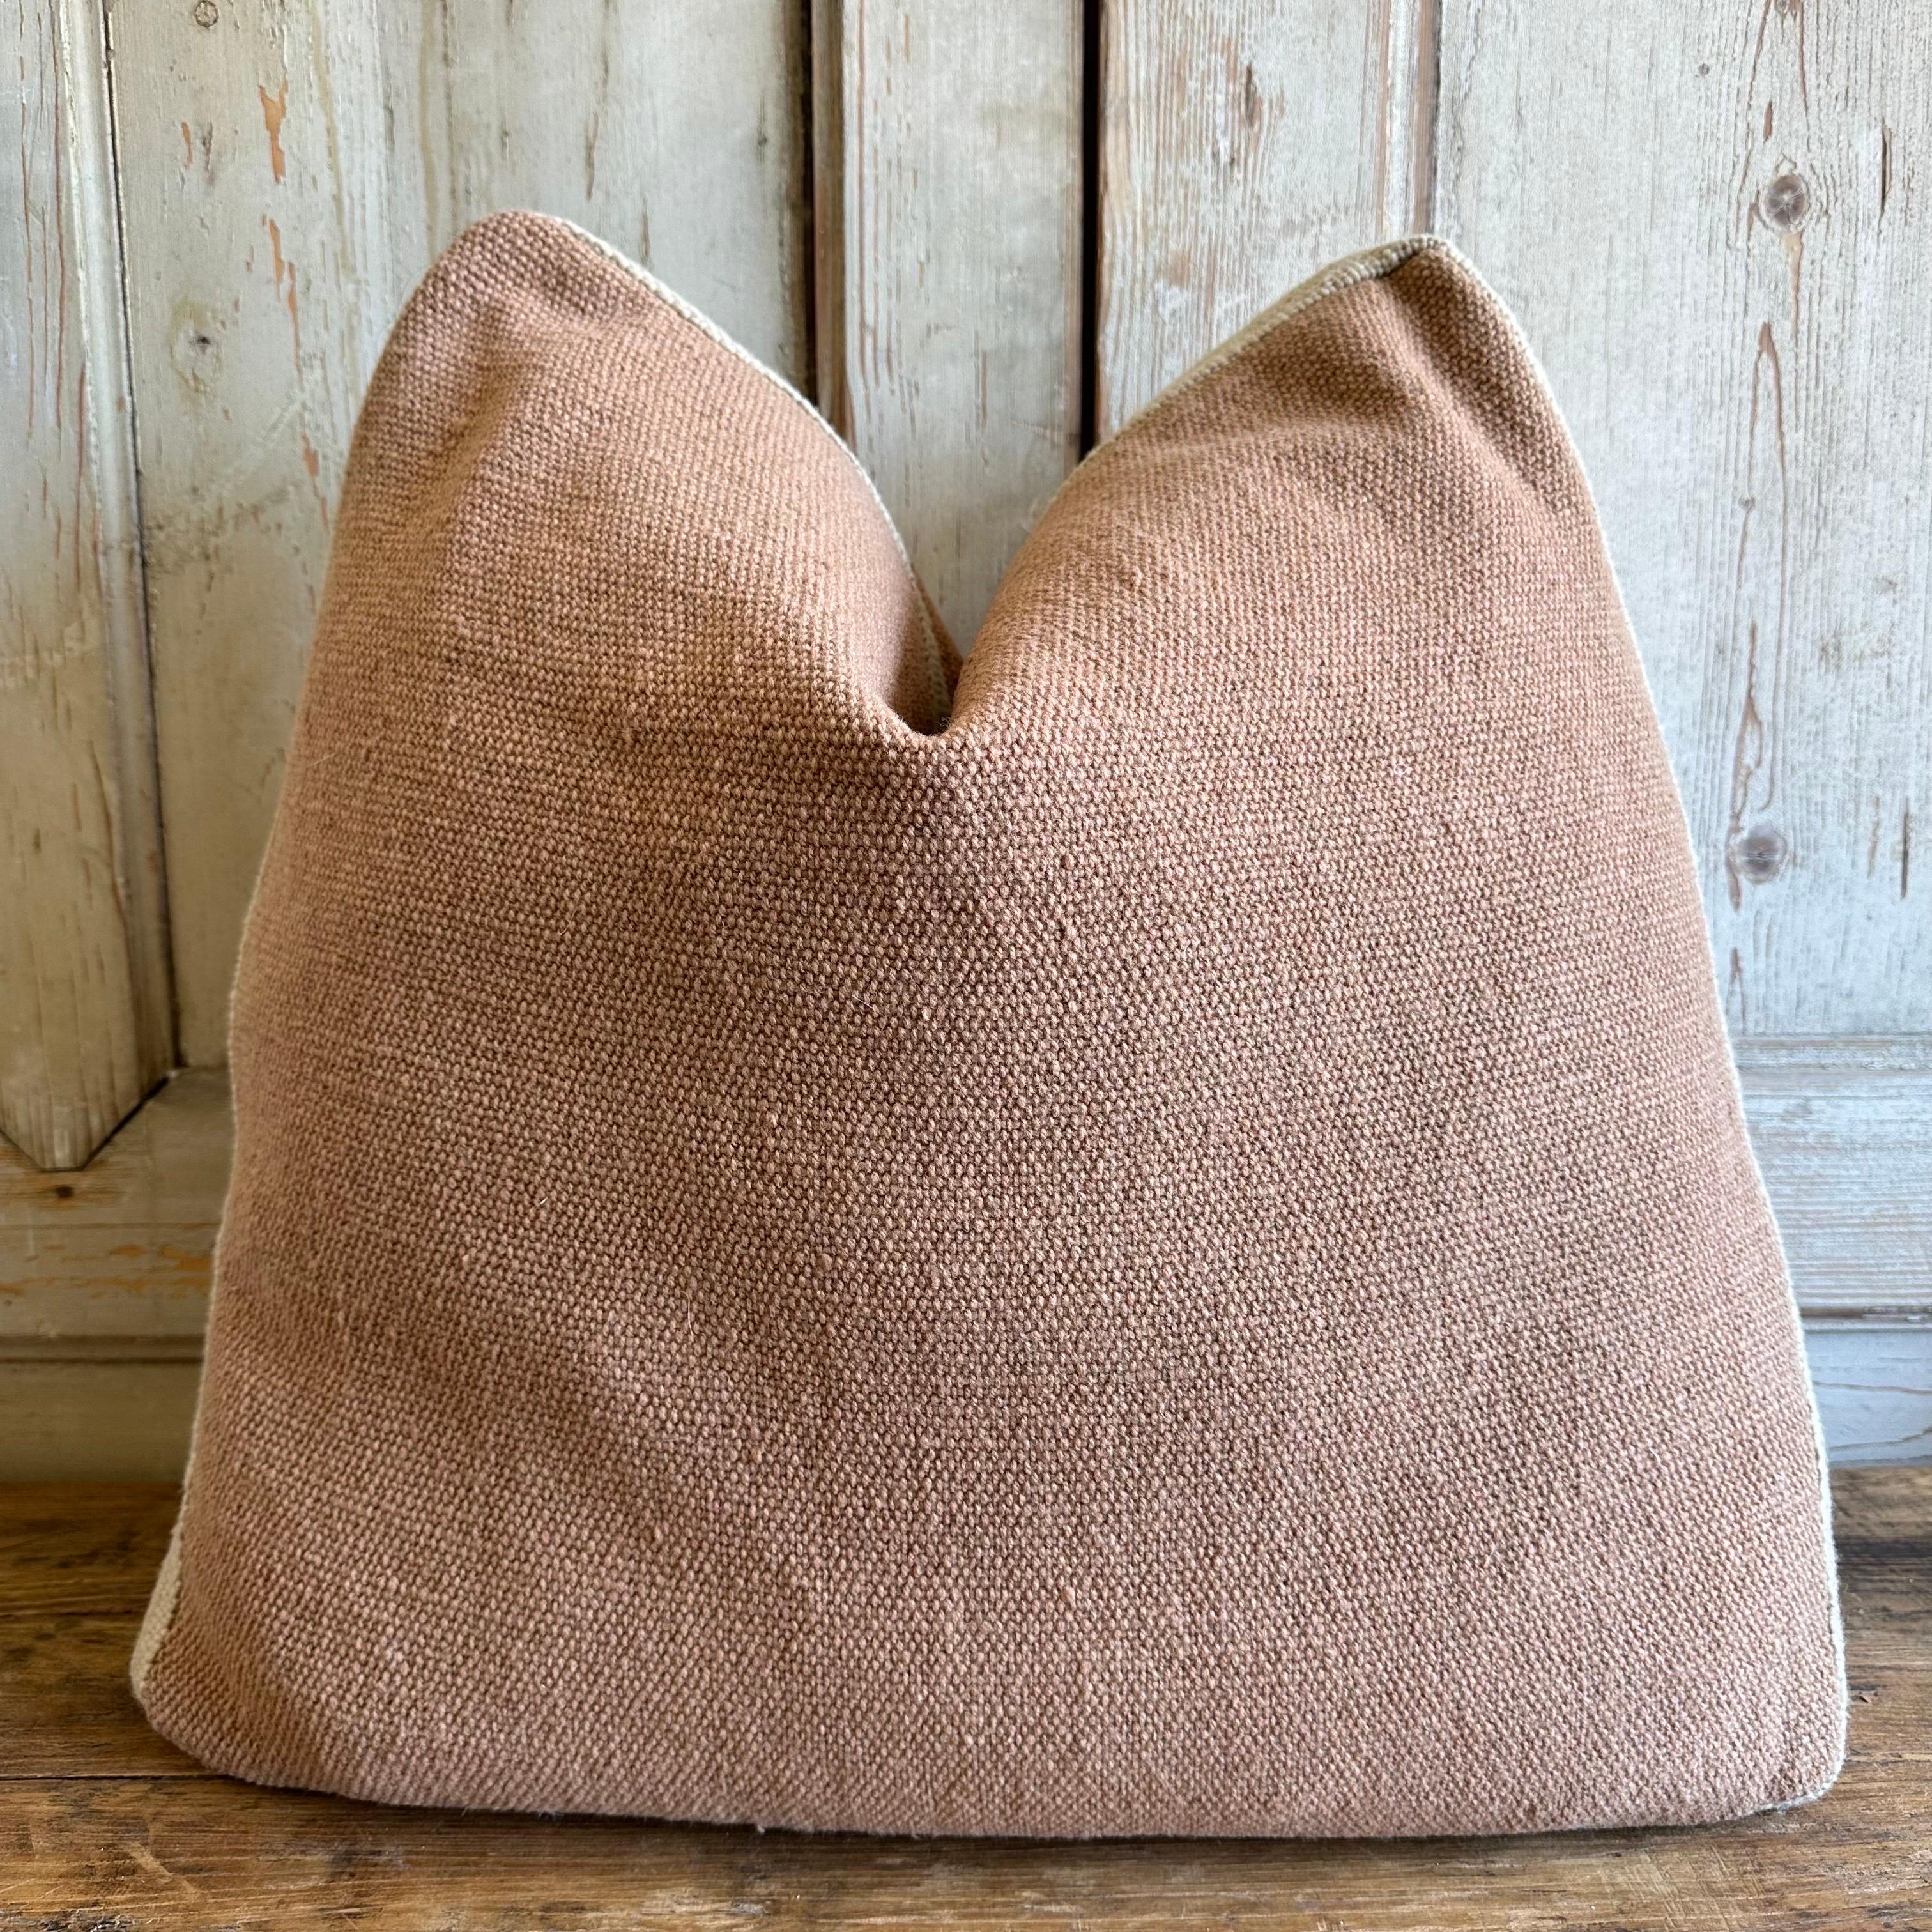 Custom Thick Woven Wool Box Pillow in Blush Nude and Oatmeal For Sale 1